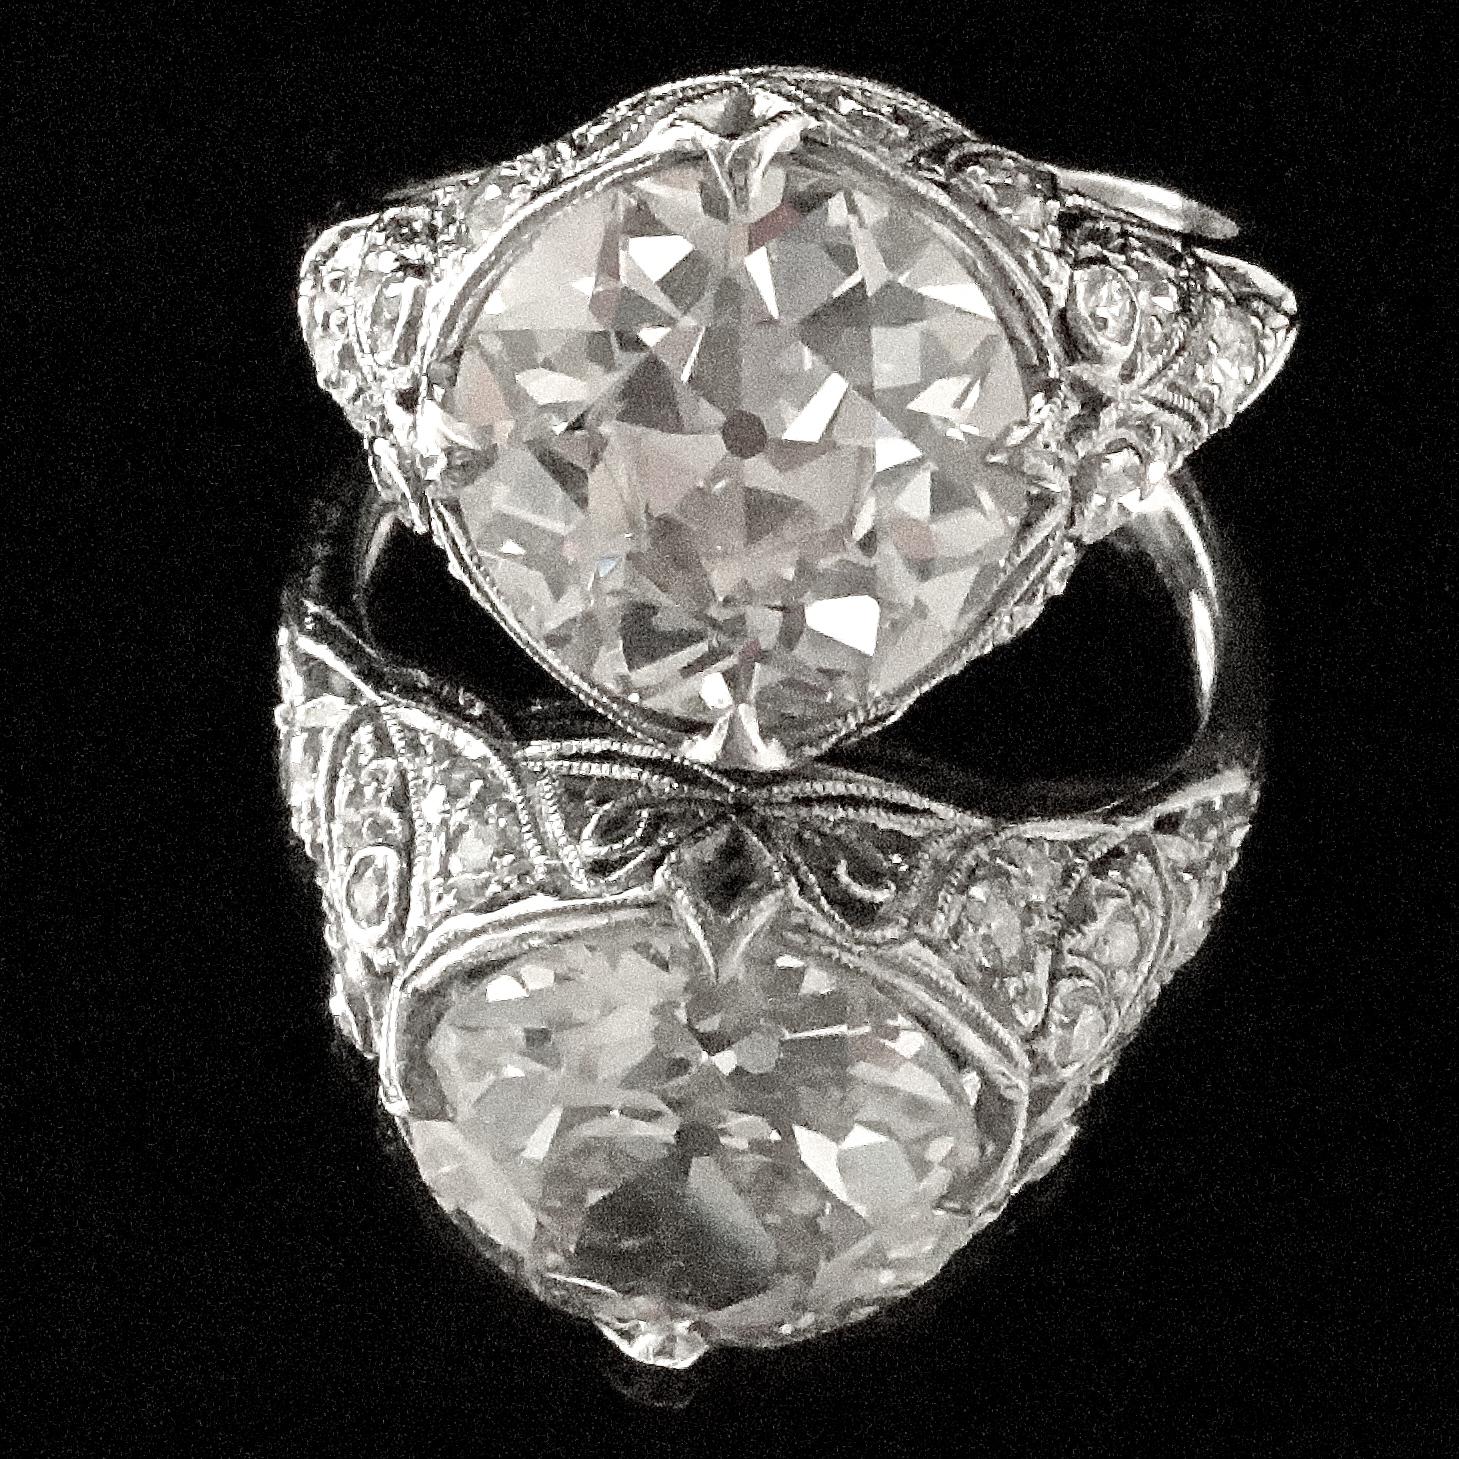 This ring is truly an Art Deco masterpiece, featuring symmetry, fine detail, and a display of elegance synonymous with the era. What was a trend in 1920's now is a reminder of that wonderful time. The ring features an old European cut diamond